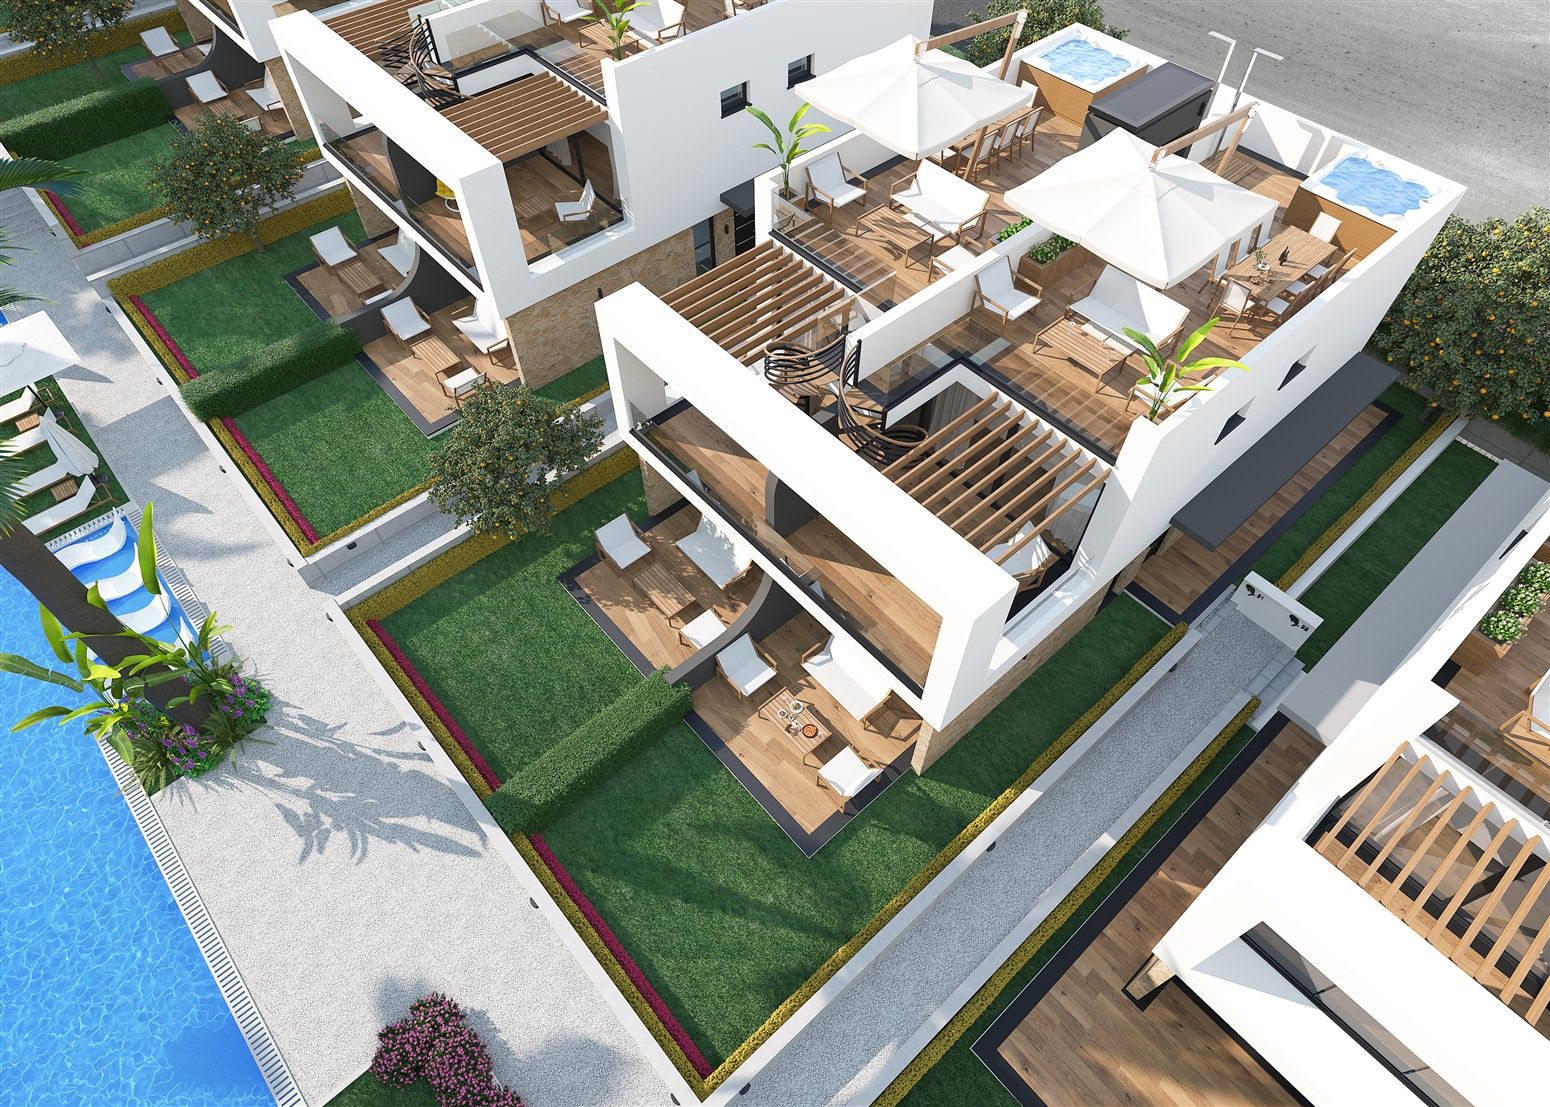 Luxury project of villas in the city center